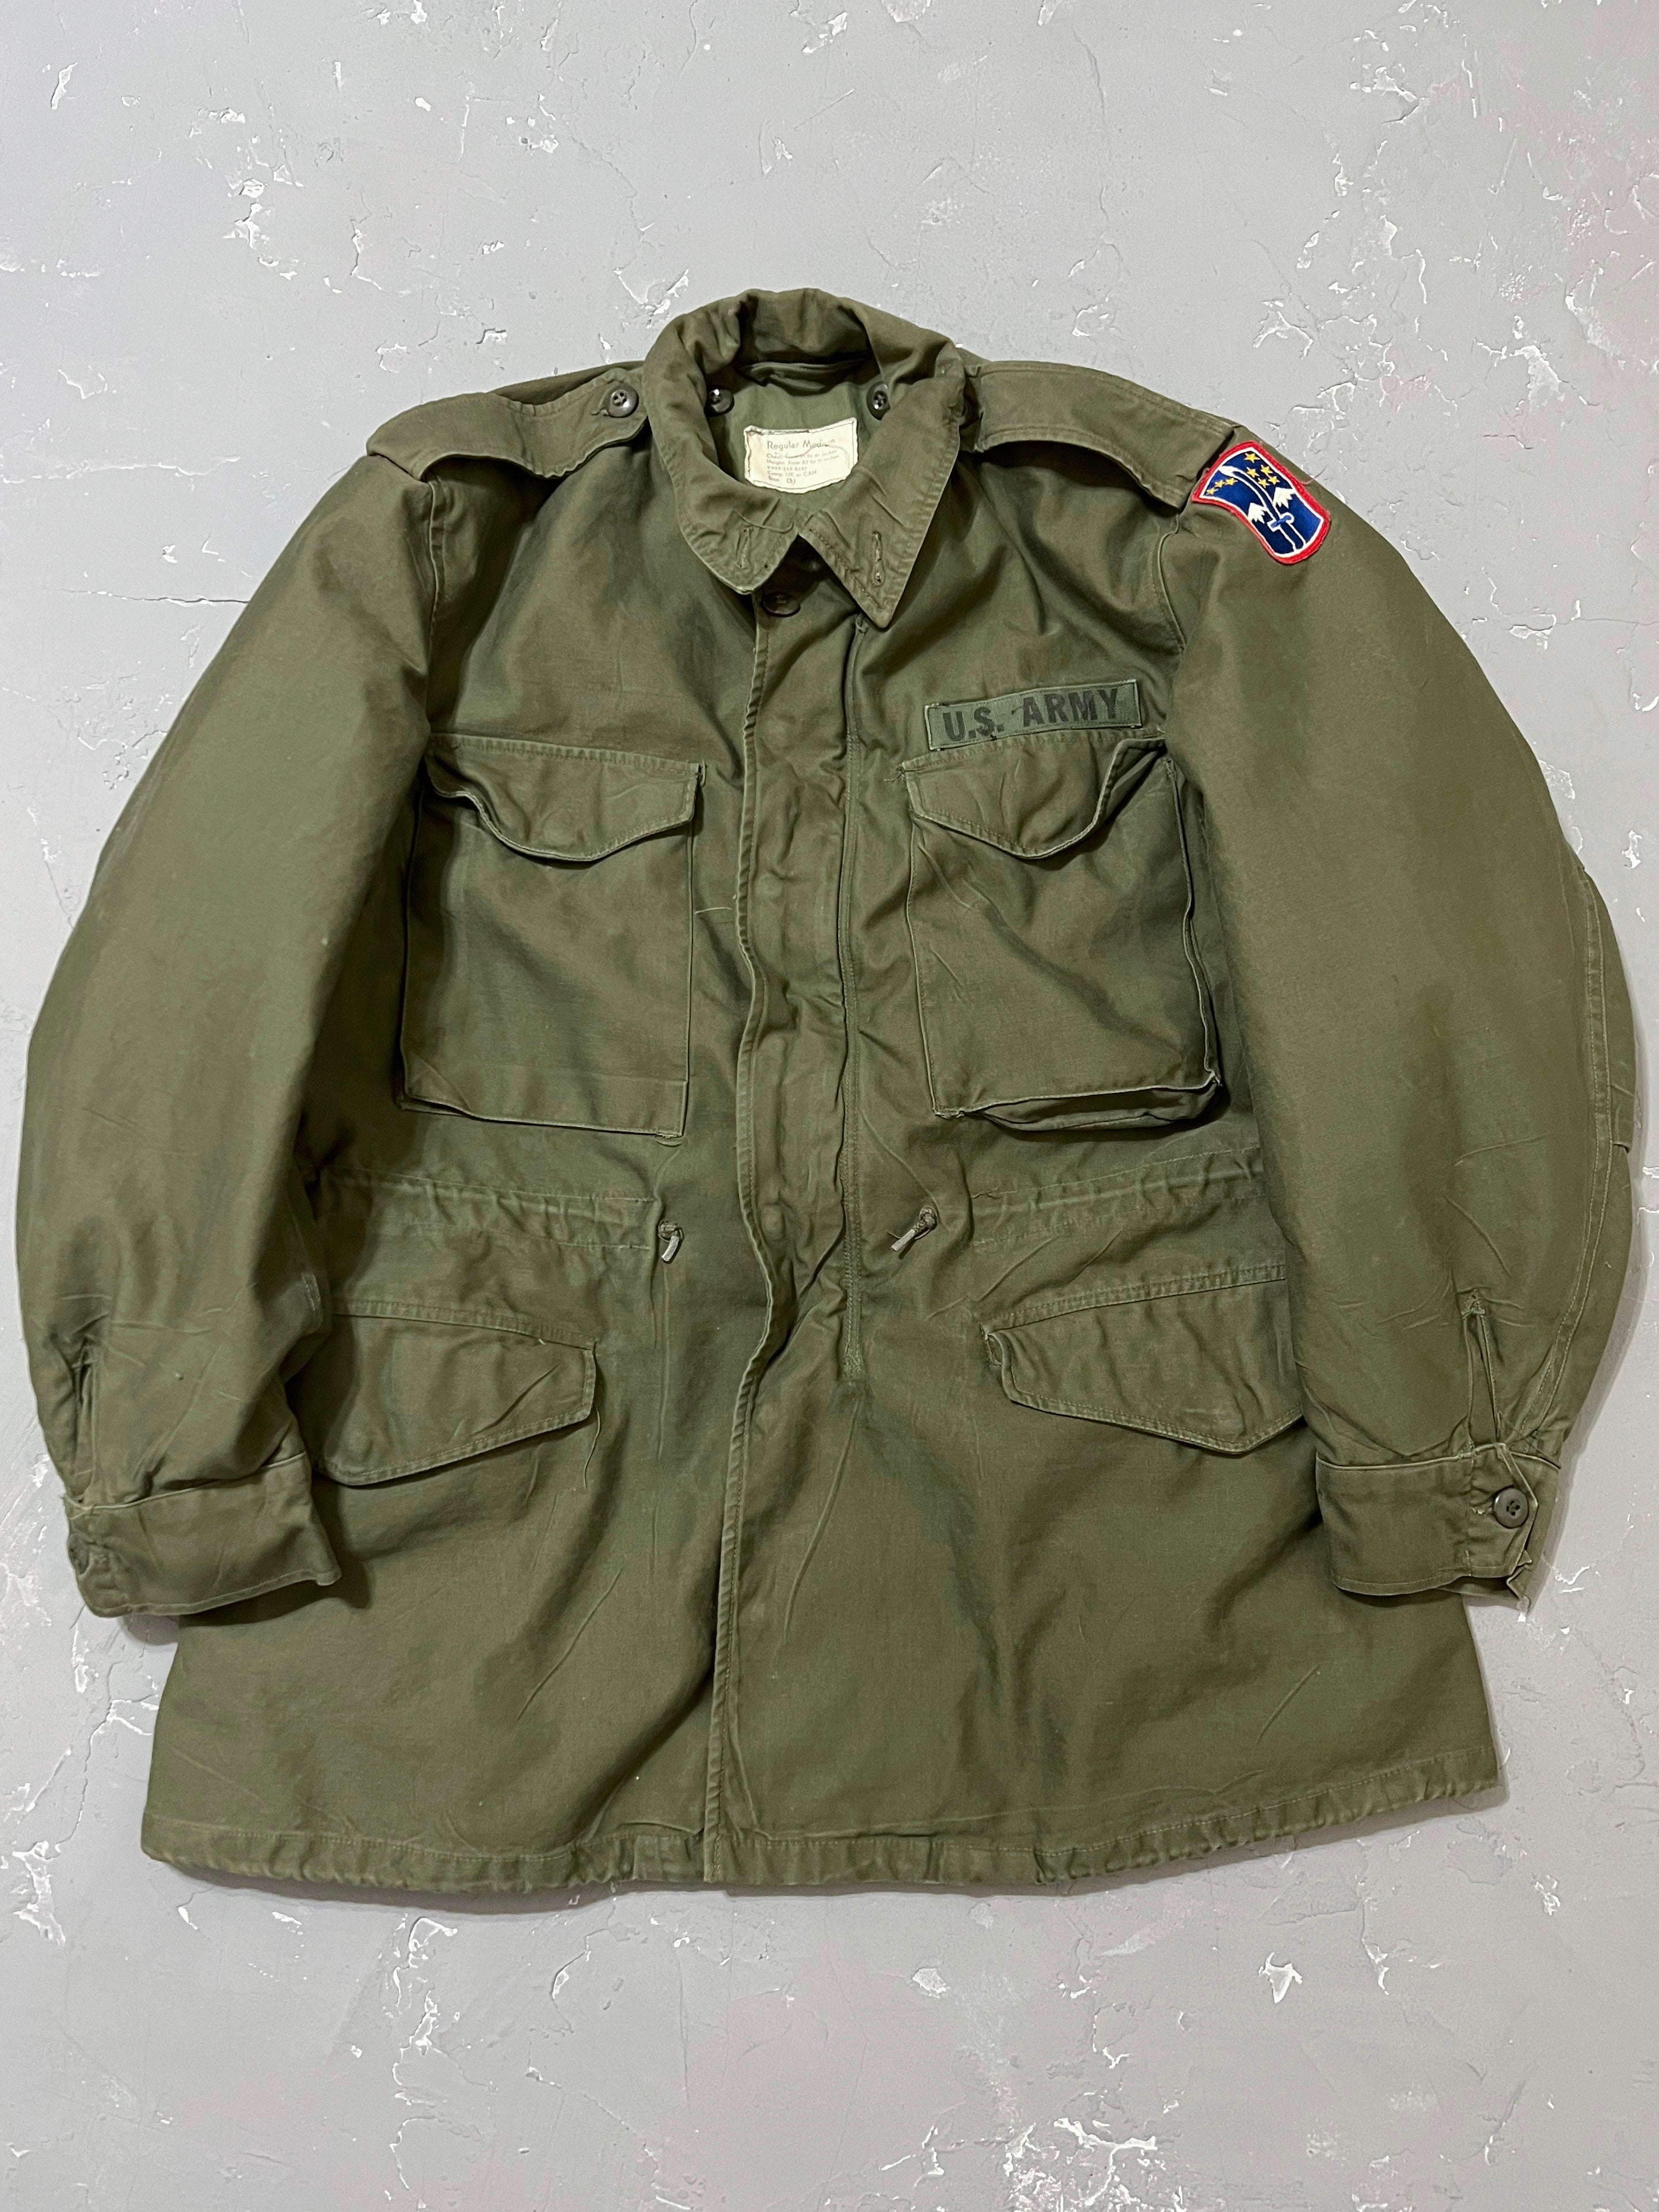 1962 OG-107 Field Jacket [M] – From The Past